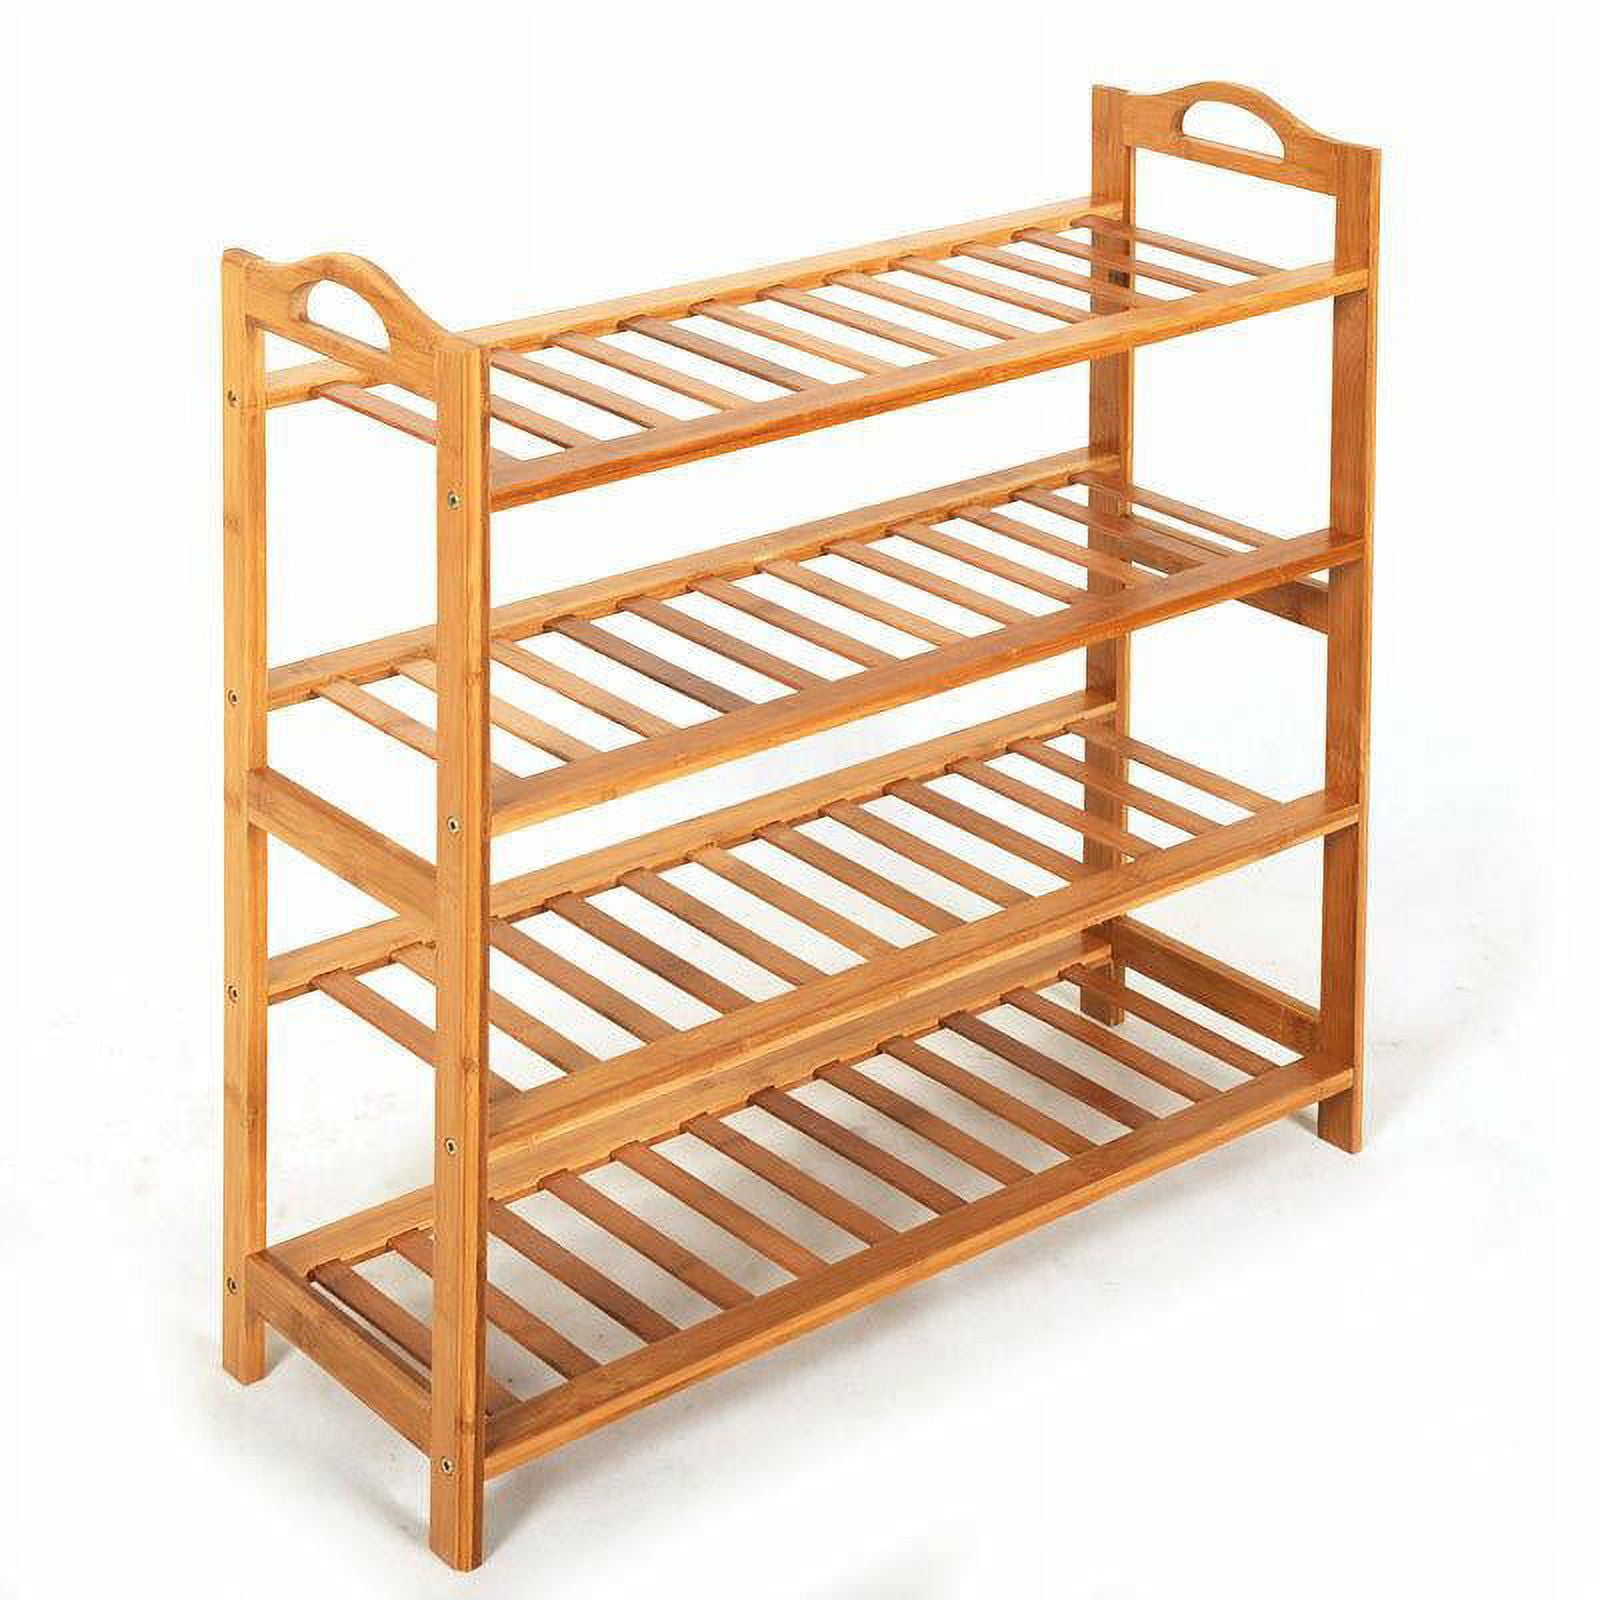 Wooden Shoe Rack 4 Tier, Bamboo and Wood Boot Rack Boots Organizer  Adjustable Shoes Storage Shelf for Entryway, Living Room, Bedroom, Bathroom, Balcony H40 x L28 x W10